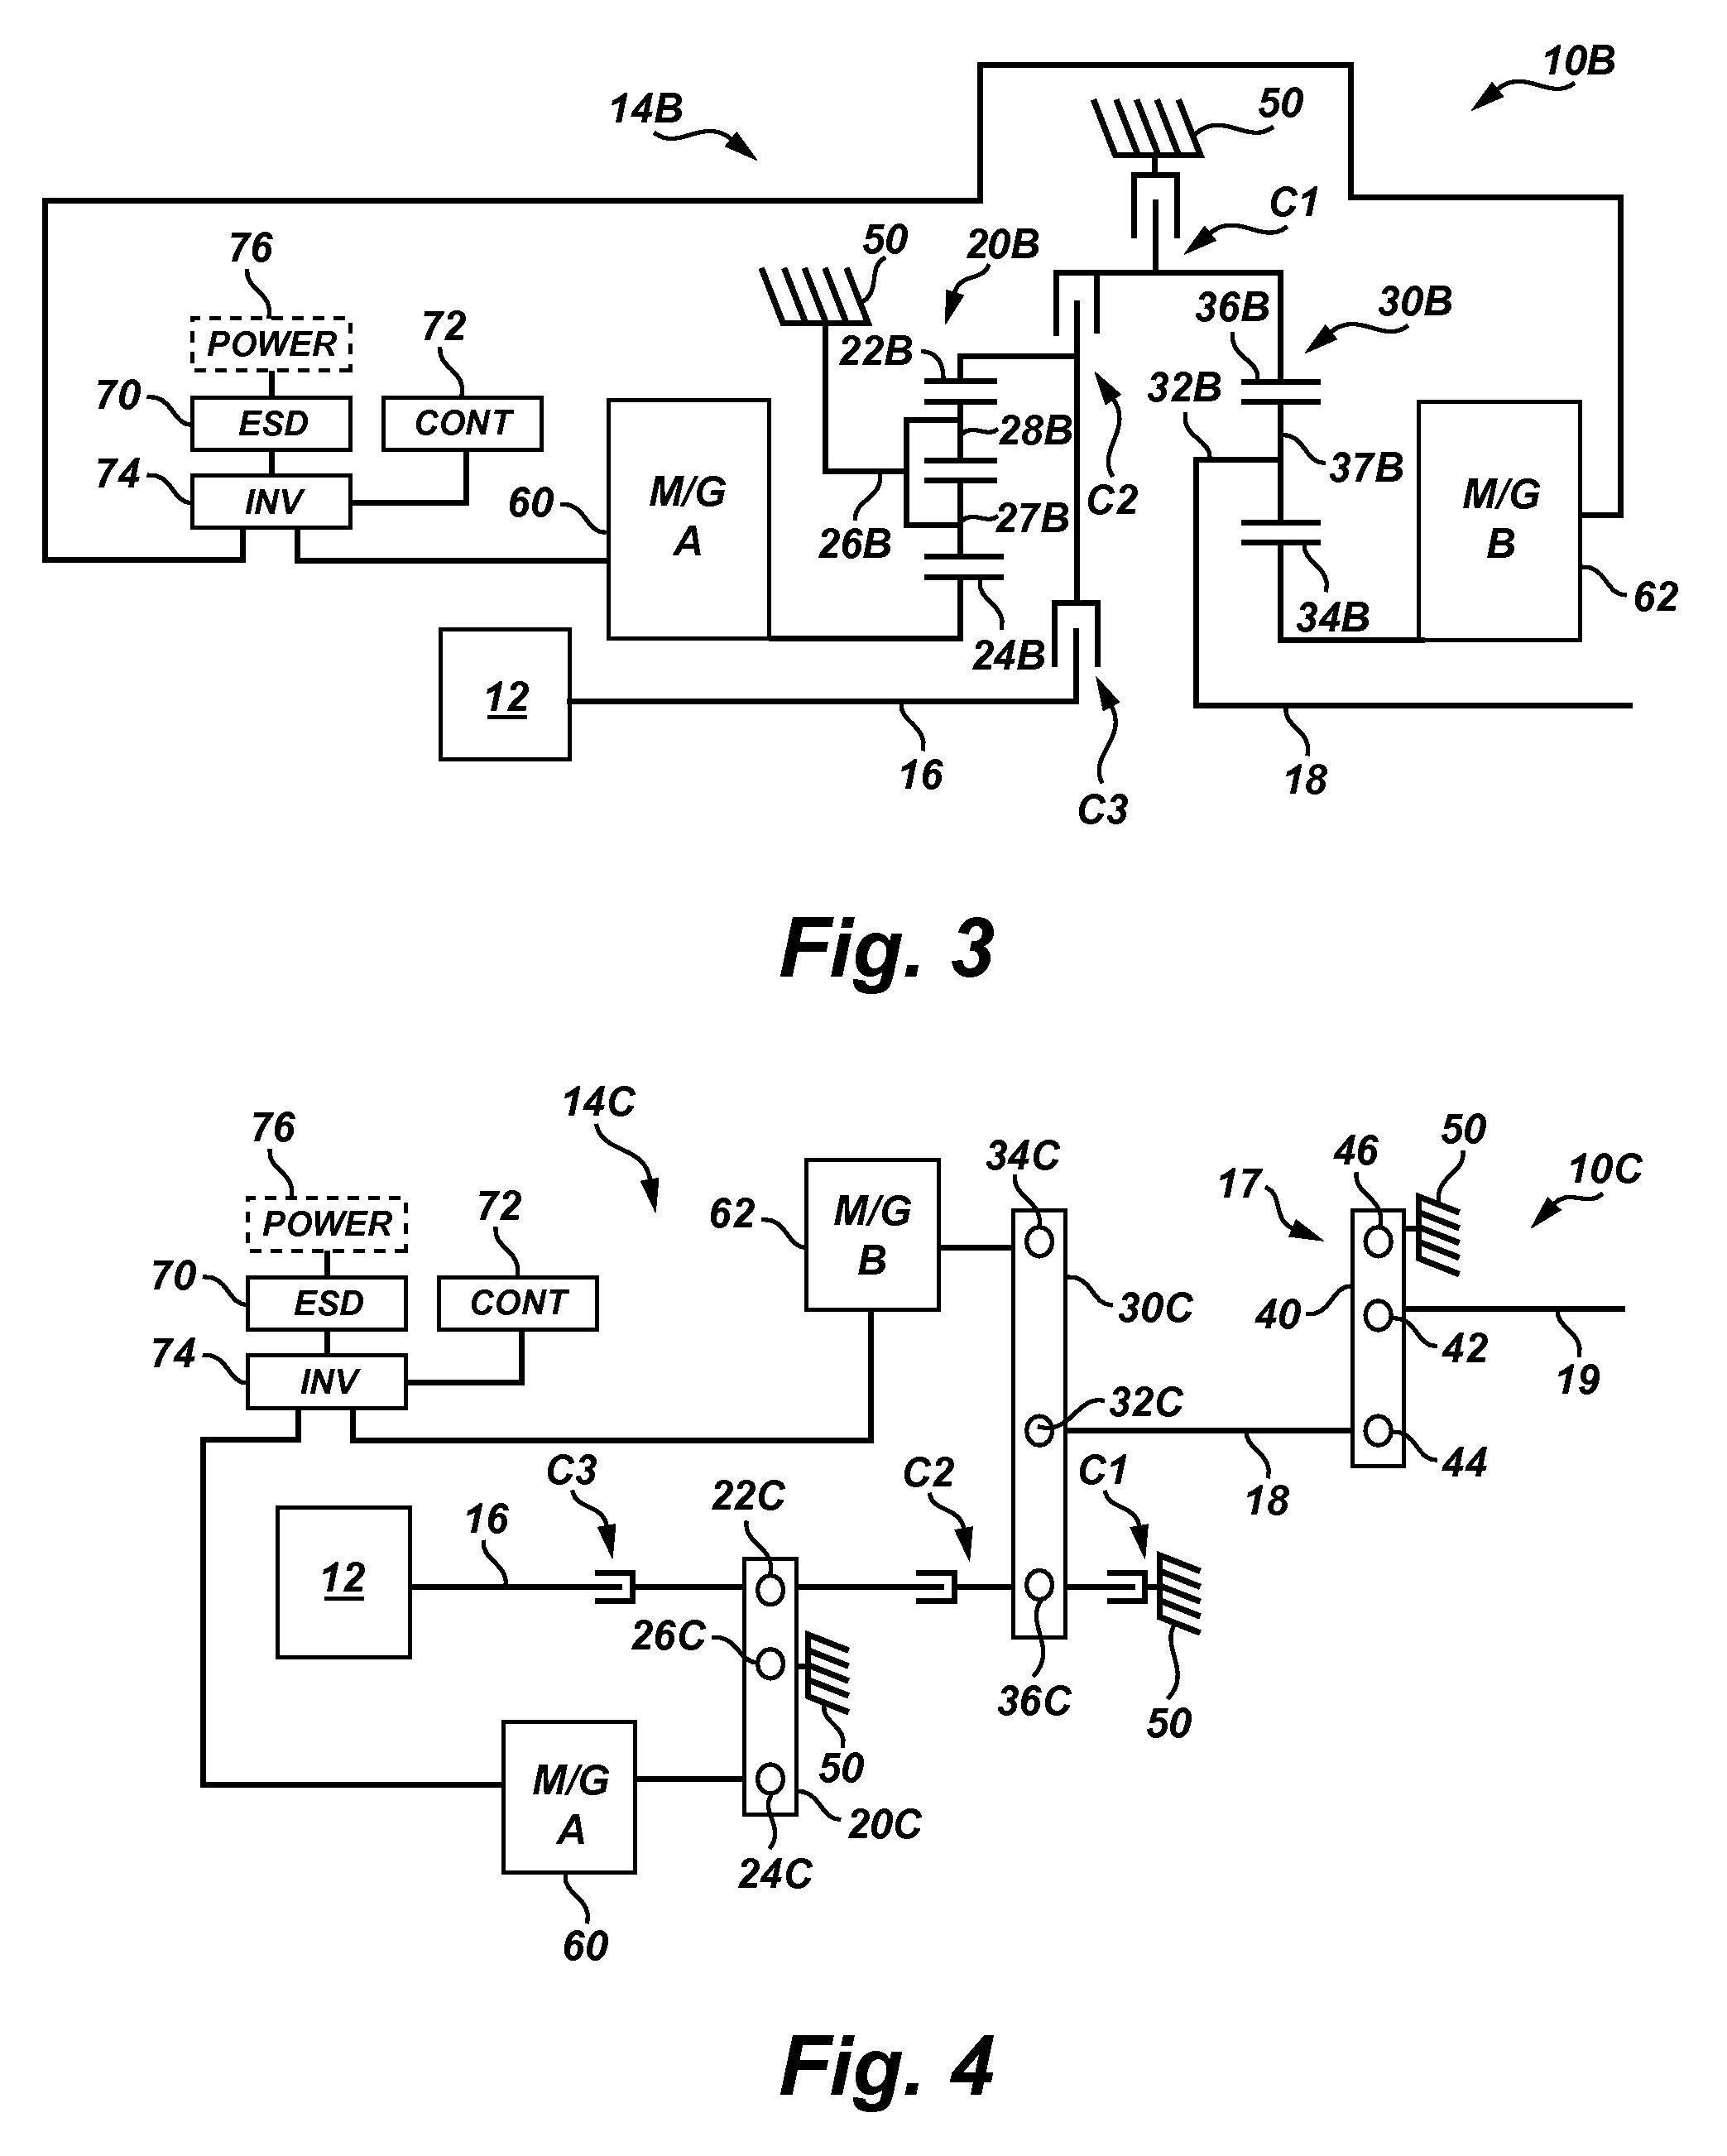 Output-split electrically-variable transmission with two planetary gear sets and two motor/generators